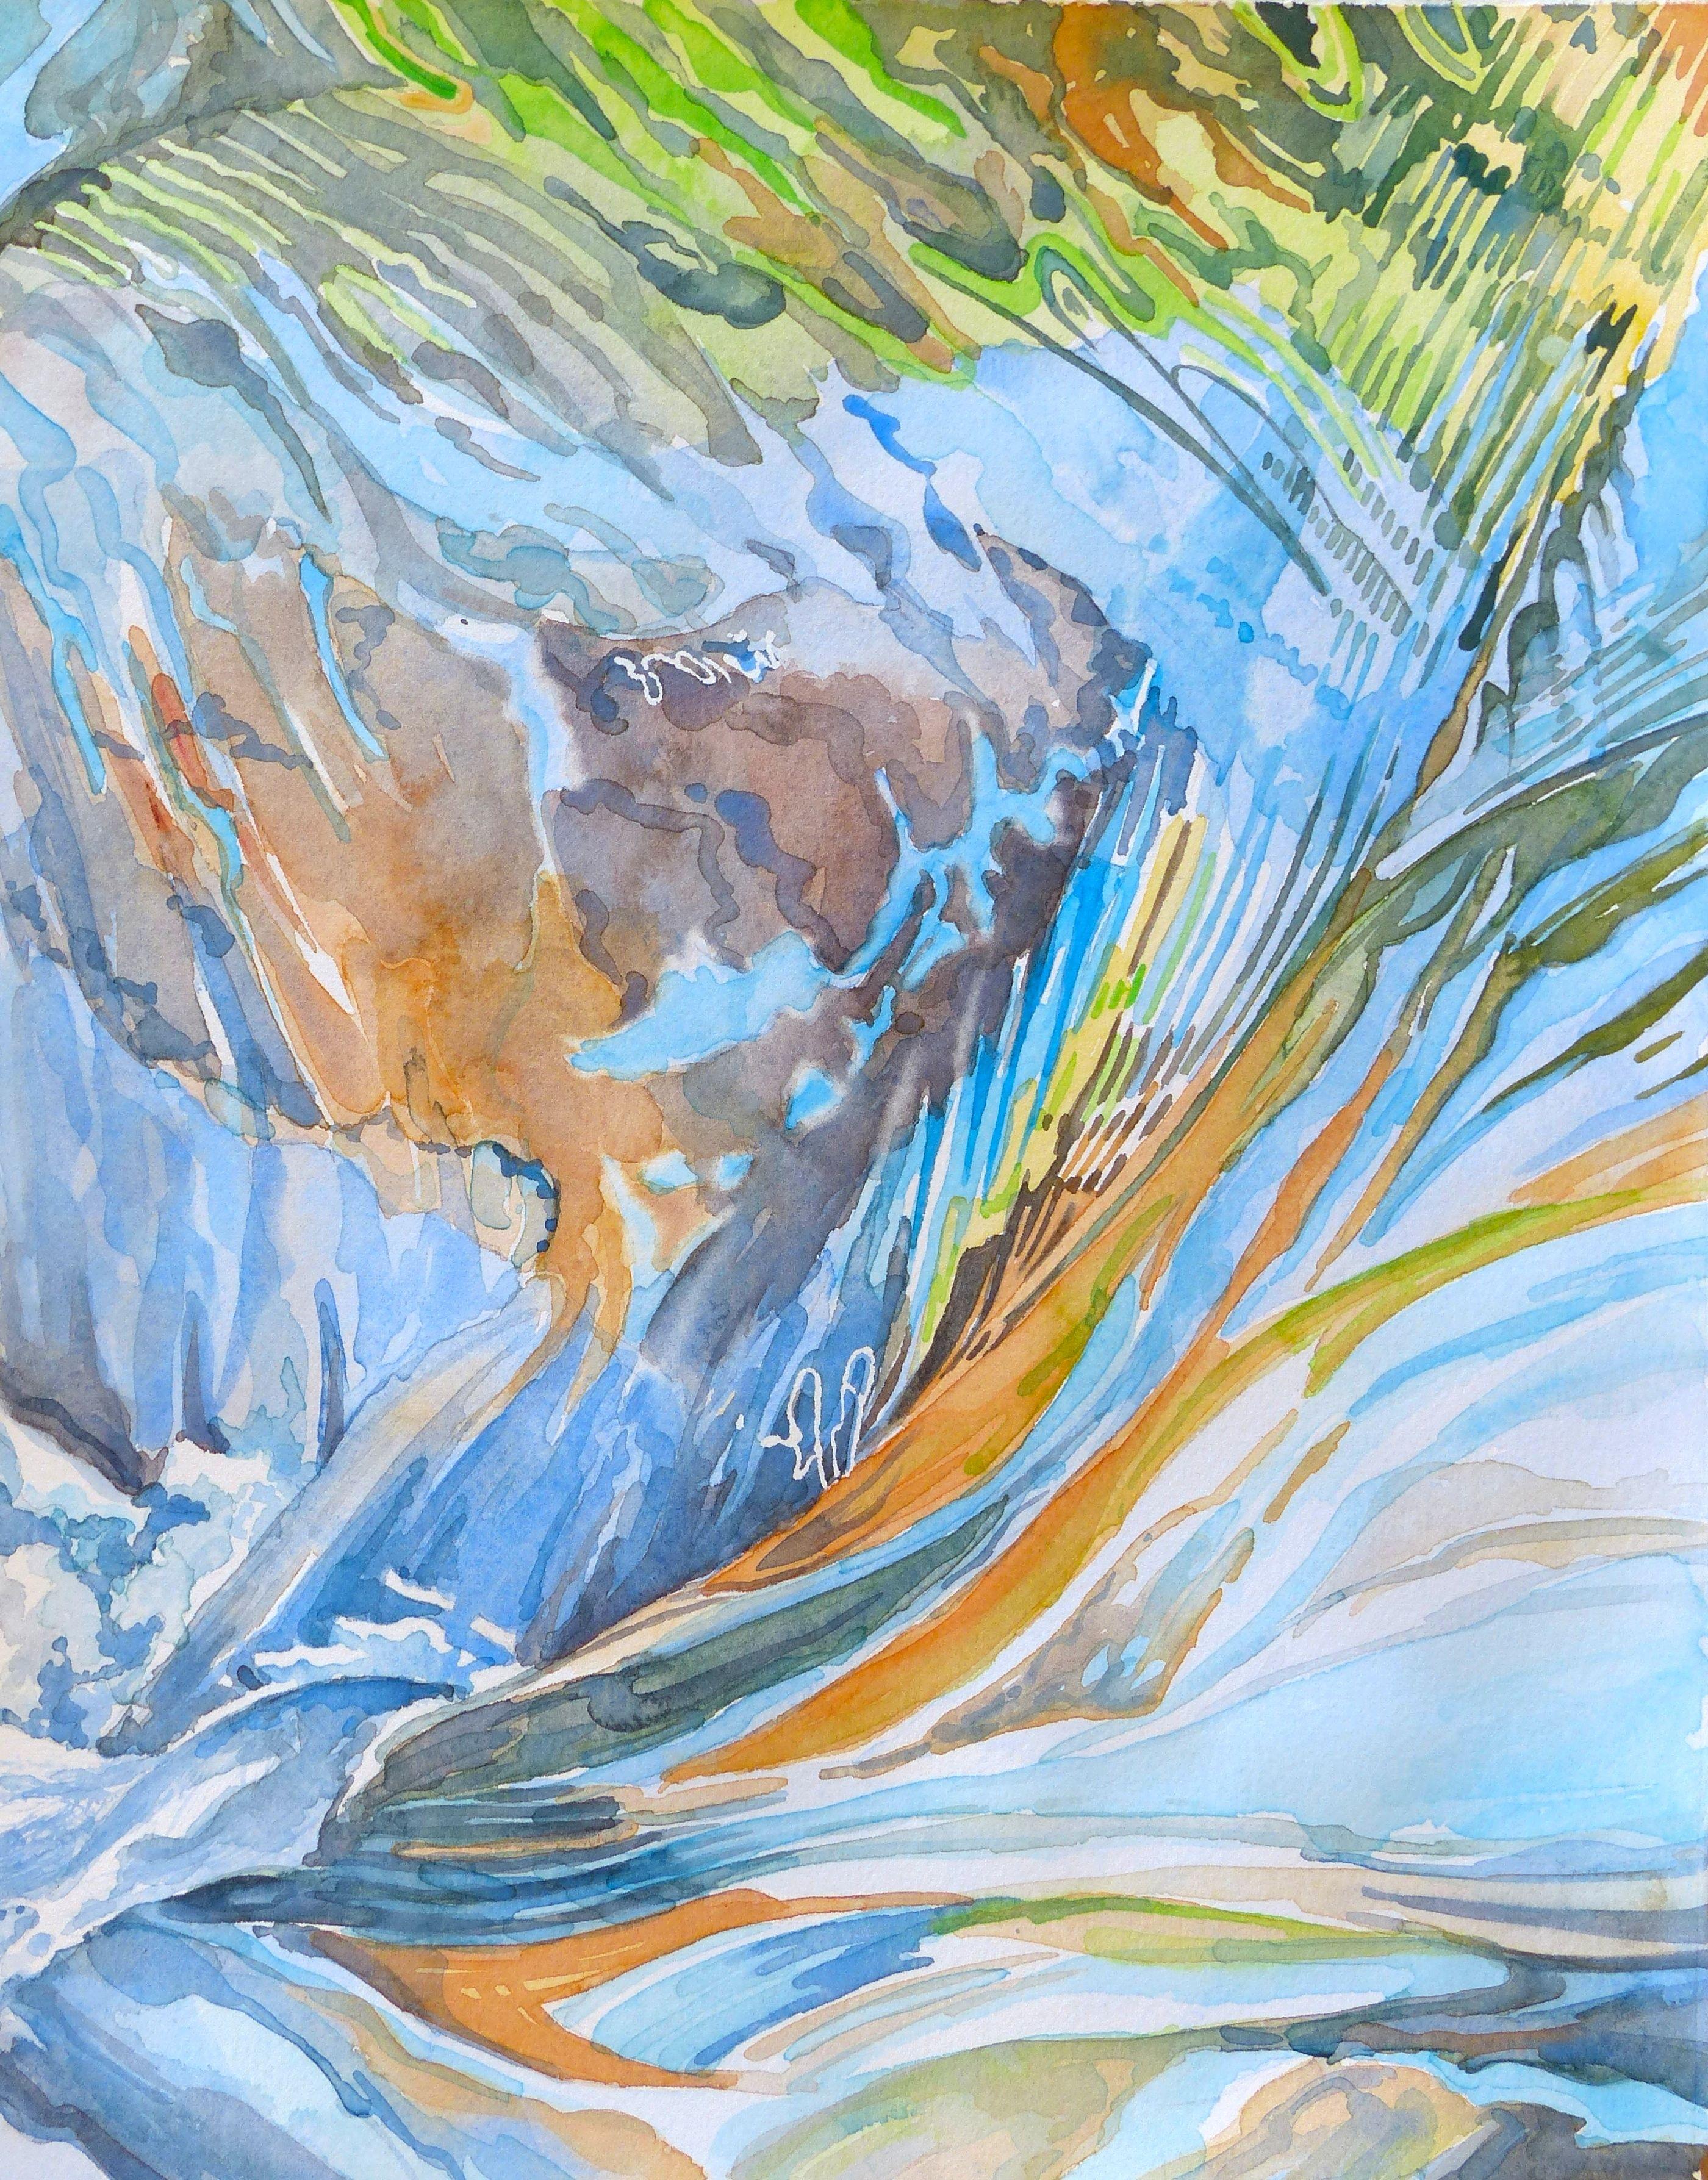 Flowing Water, Painting, Watercolor on Watercolor Paper - Art by Leslie White